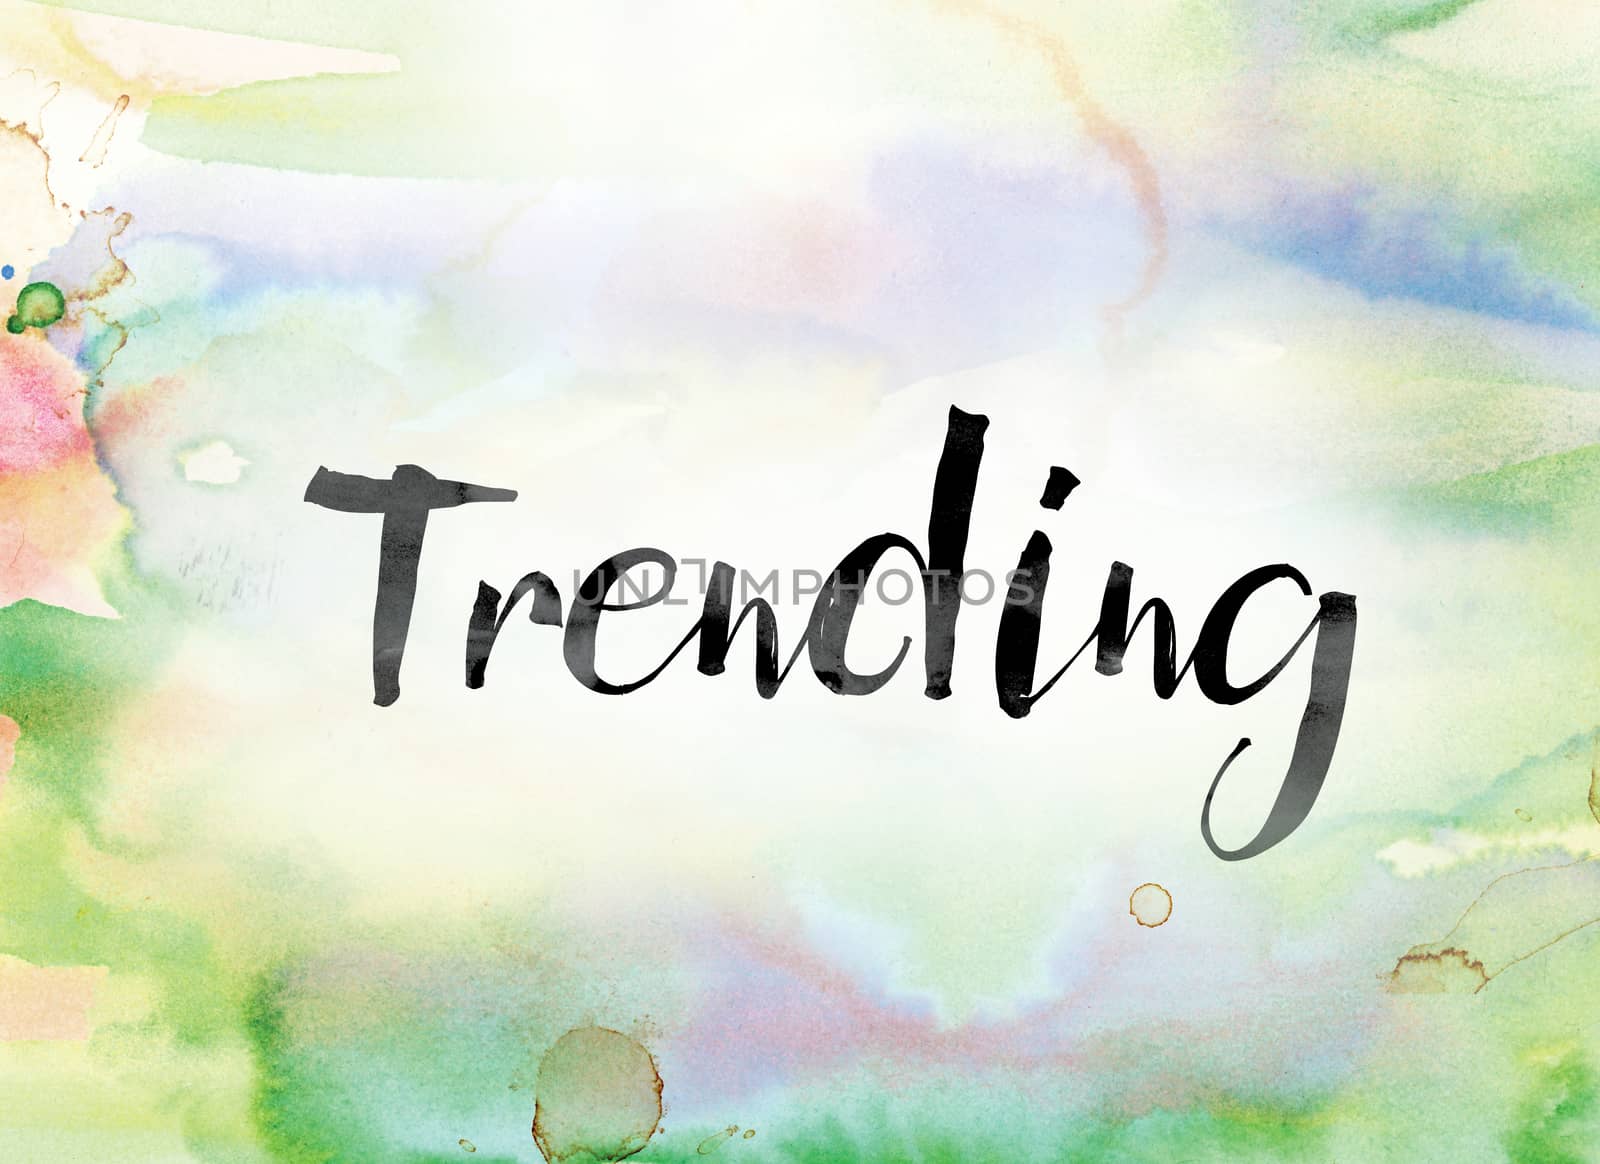 The word "Trending" painted in black ink over a colorful watercolor washed background concept and theme.